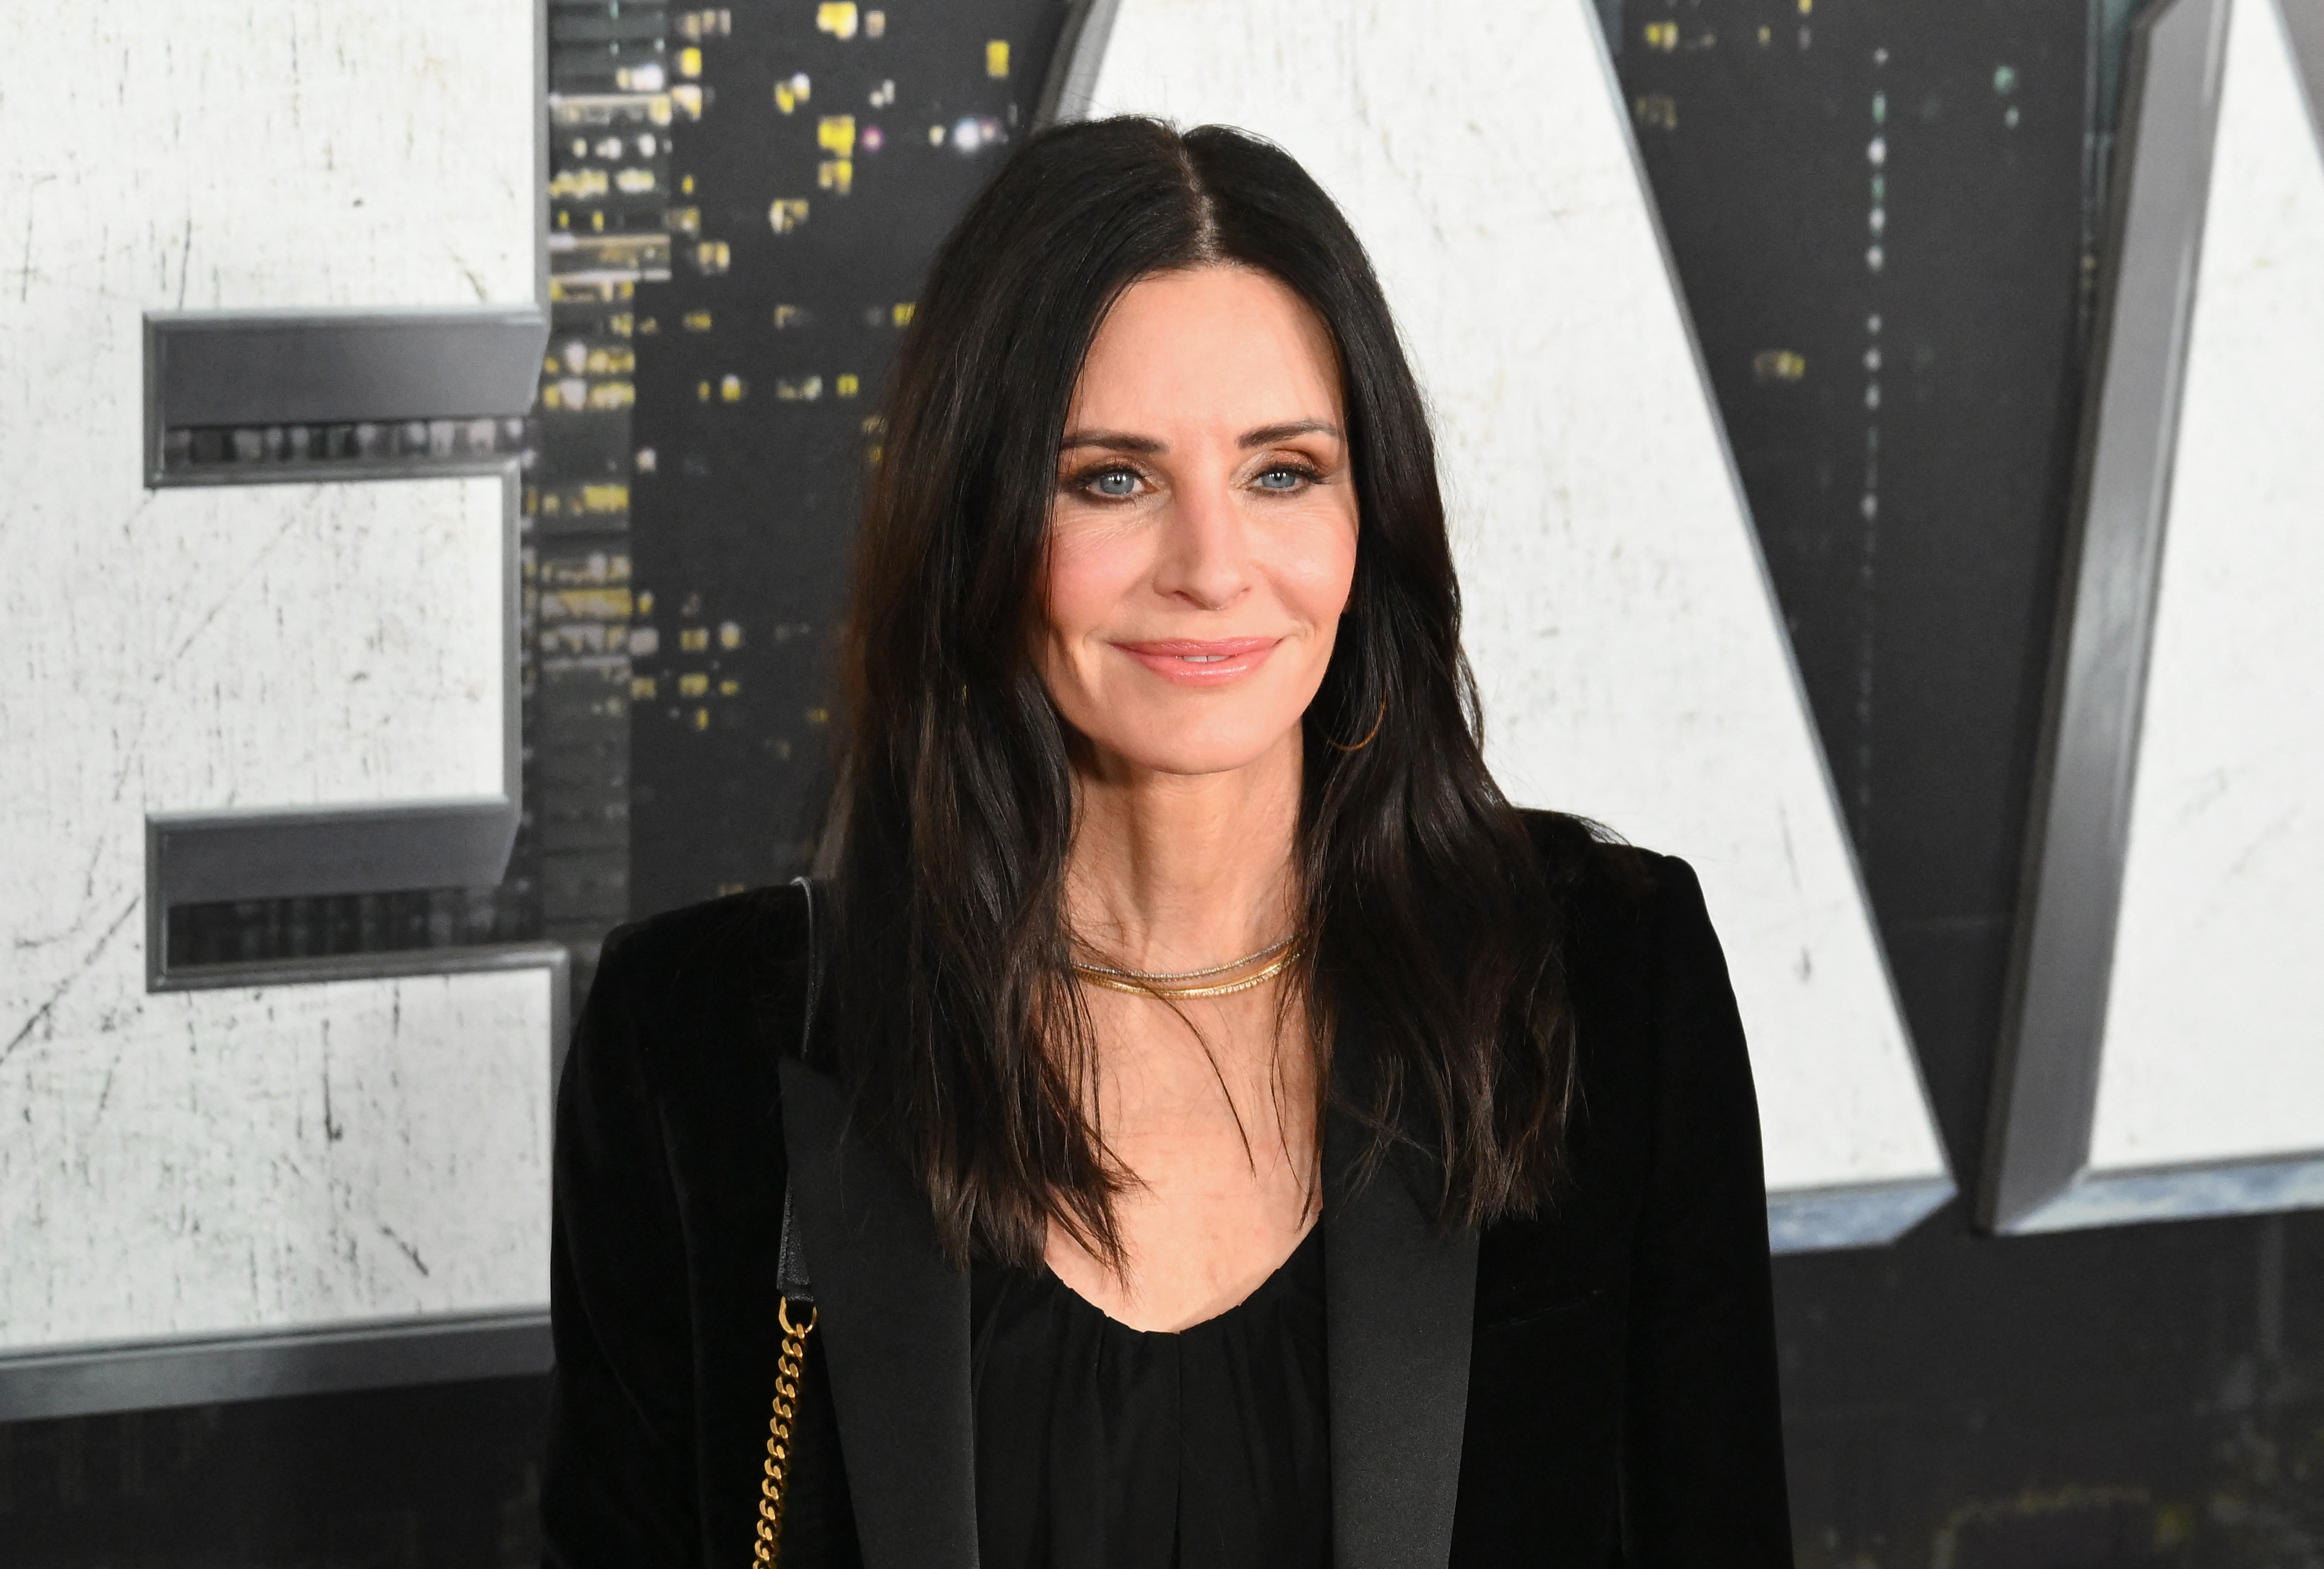 Courteney Cox at the world premiere of "Scream VI" on March 6, 2023, in New York City. | Source: Getty Images